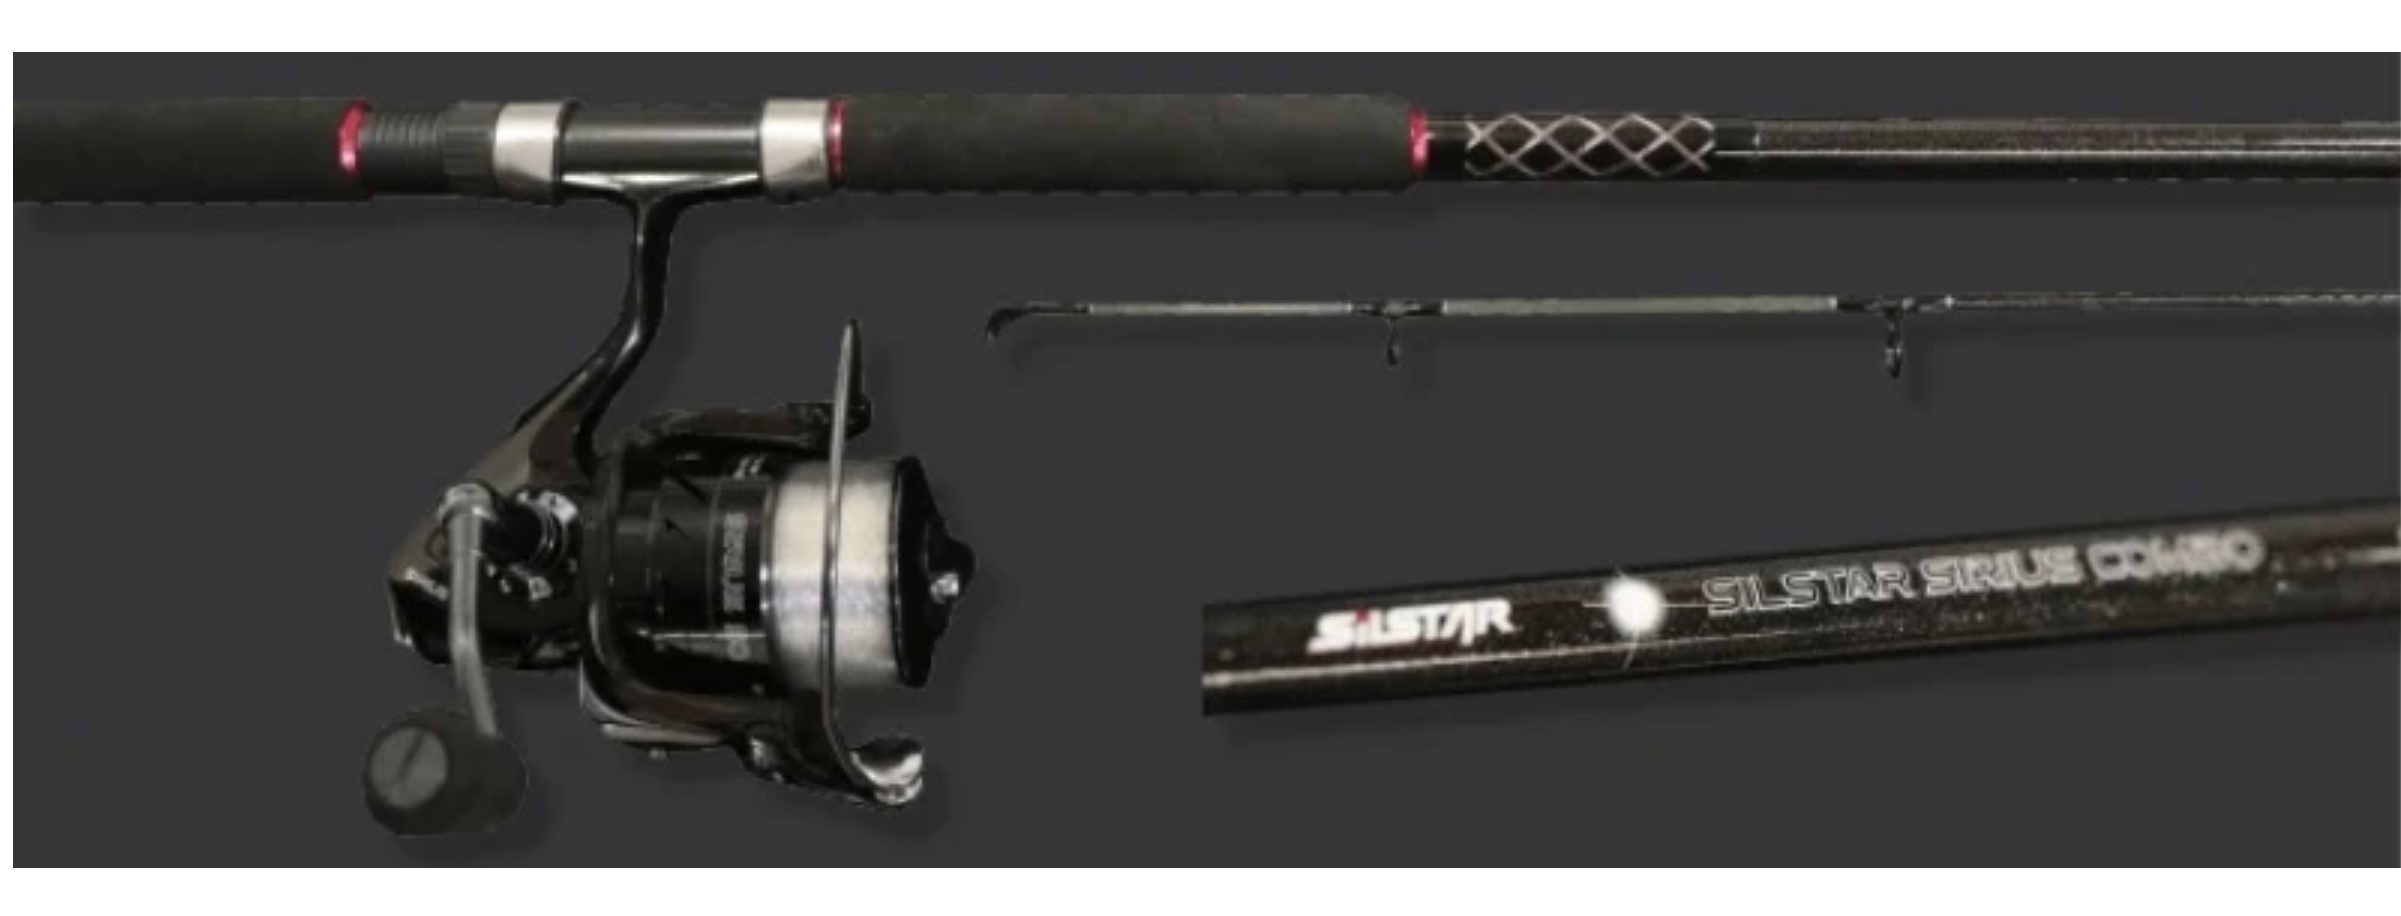 Silstar Sirius Rod & Reel Combo (Available in-store only) - The Bait Shop  Gold Coast